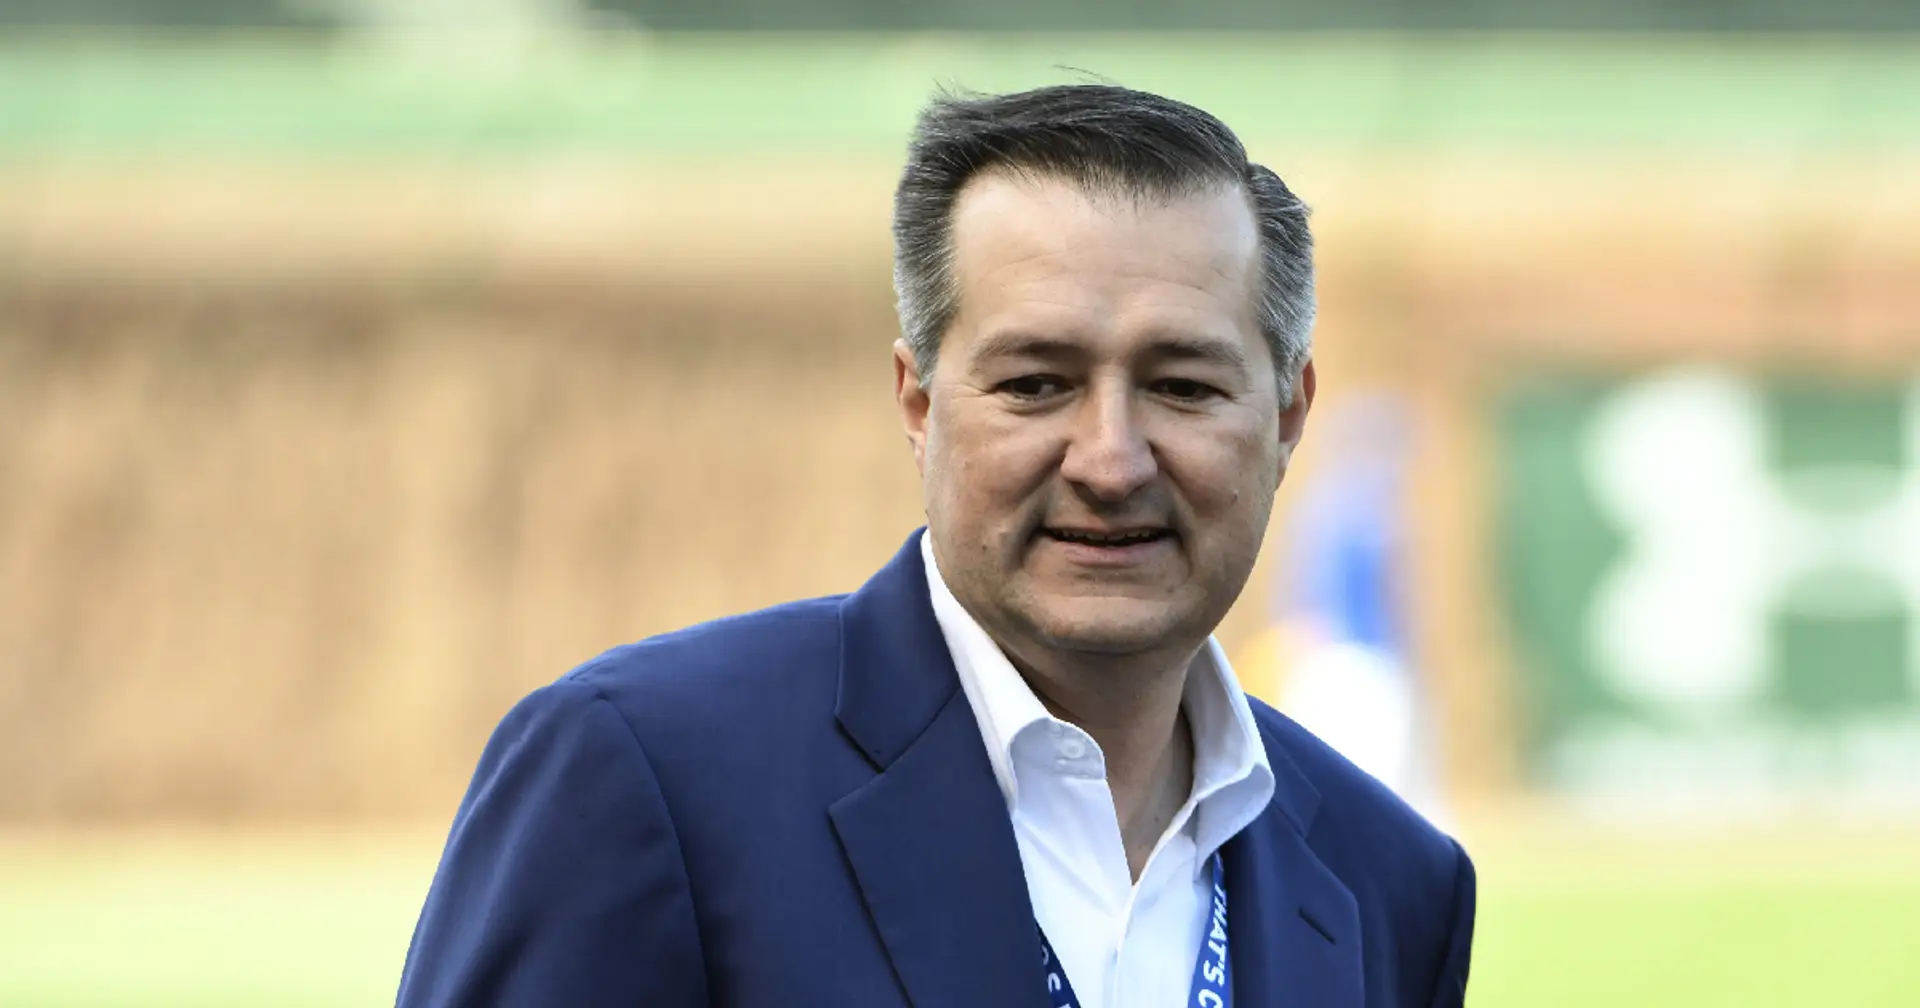 Ricketts family deny they're racist in statement to Chelsea fans protesting against them